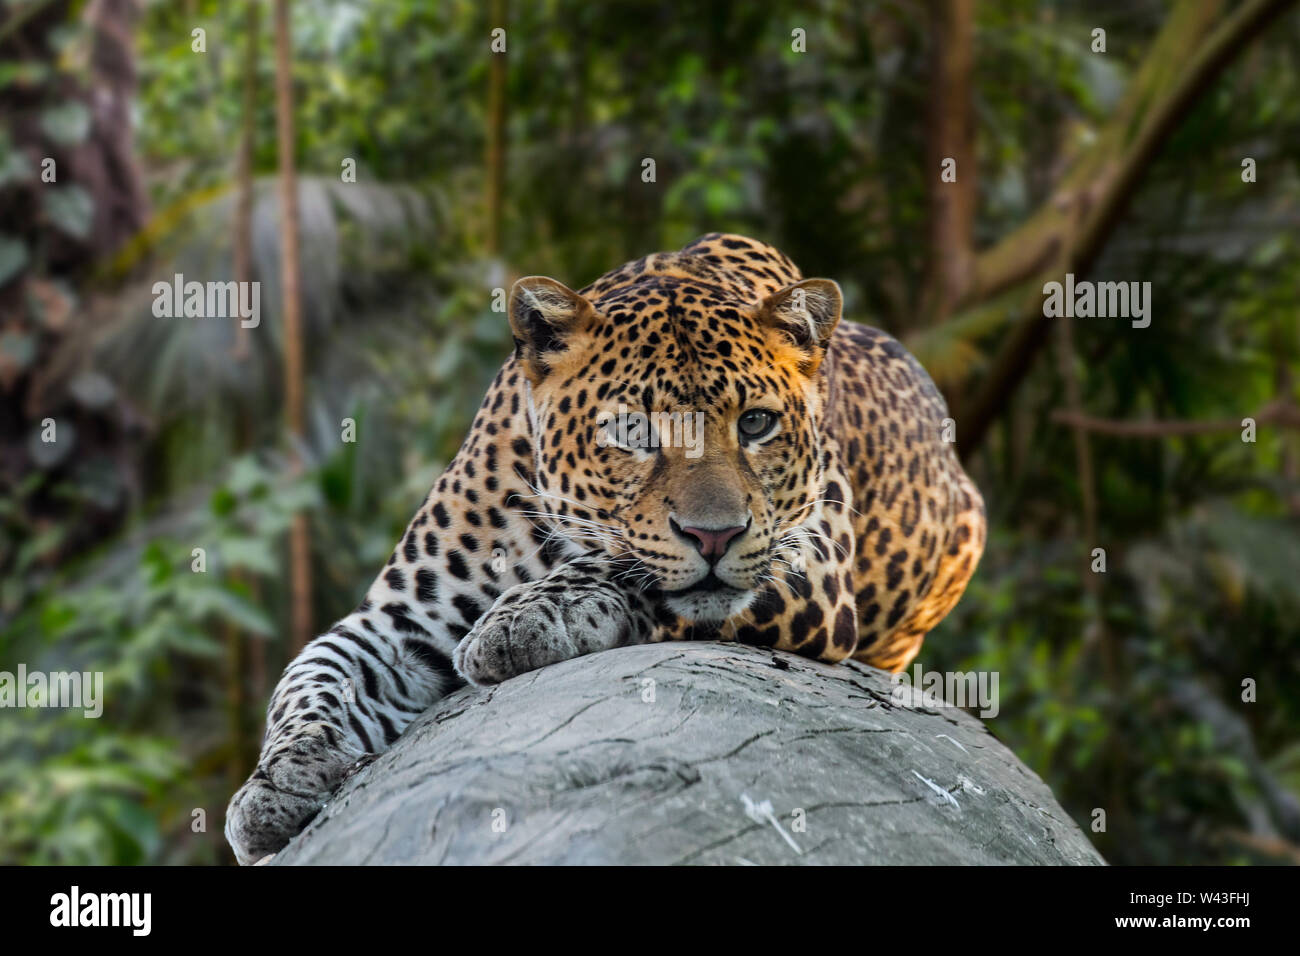 Javan leopard (Panthera pardus melas) resting on fallen tree trunk in tropical rainforest, native to the Indonesian island of Java Stock Photo